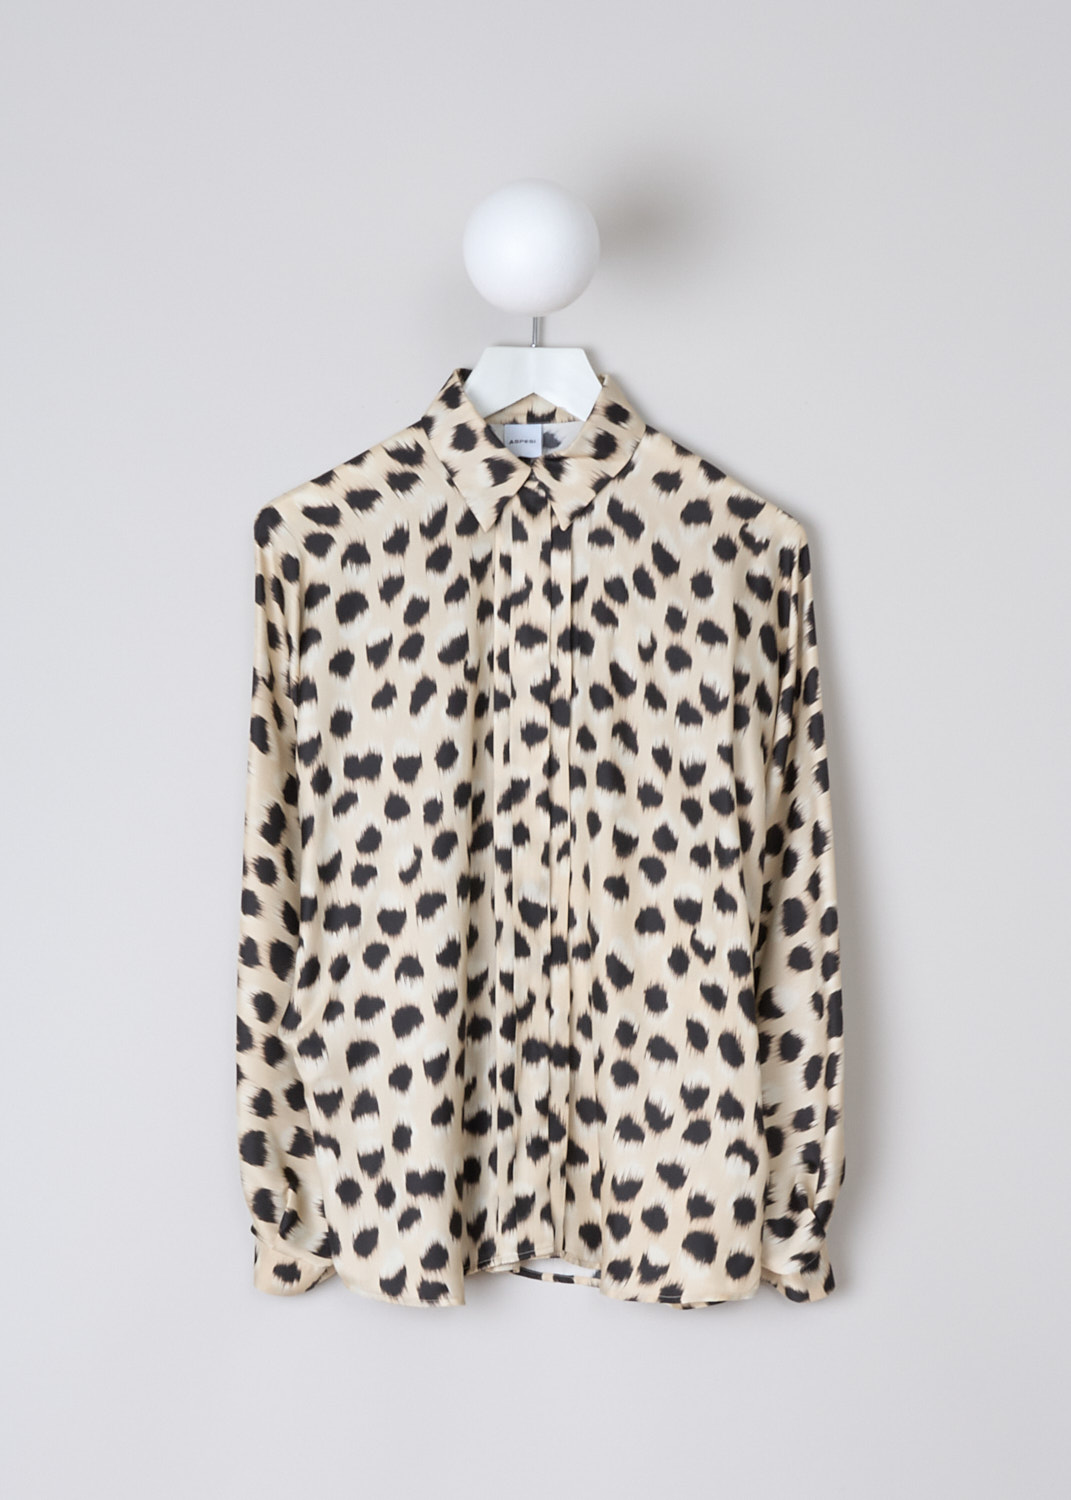 ASPESI, FADED ANIMAL PRINT BLOUSE, 5456_V592_60113, Beige, Print, Black, Front, This beige blouse with faded animal print features a classic collar, a concealed front button closure and Dolman sleeves with buttoned cuffs. The blouse has a pleated back and a slightly rounded hemline. 
